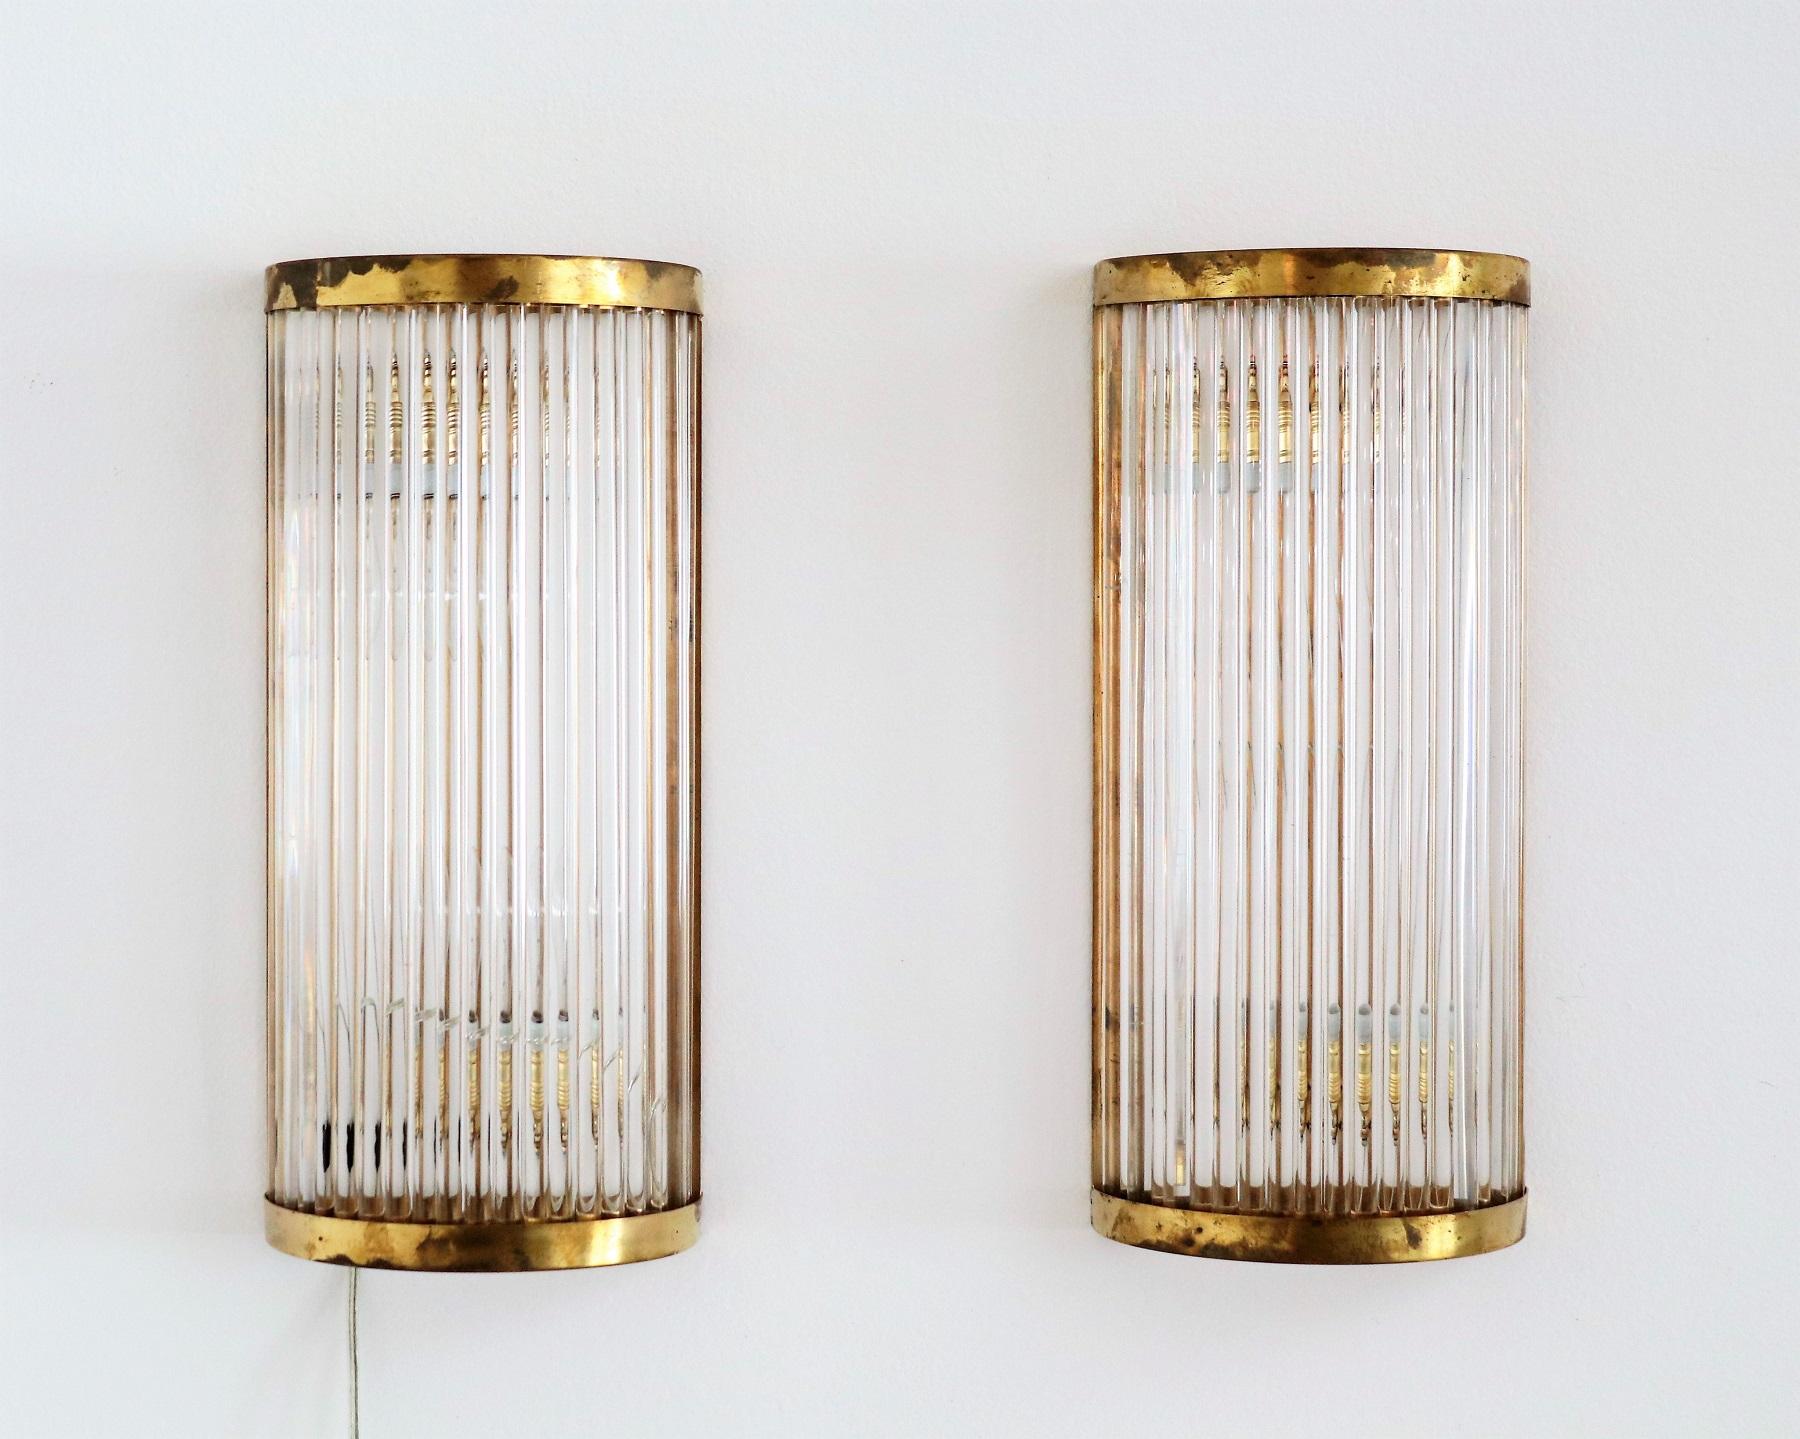 Gorgeous and glamorous big size set of two pieces wall sconces made of long transparent glass rods with full brass frame.
These wall sconces with their timeless design made in Italy in the Art Deco Style are made of excellent craftsmanship and are